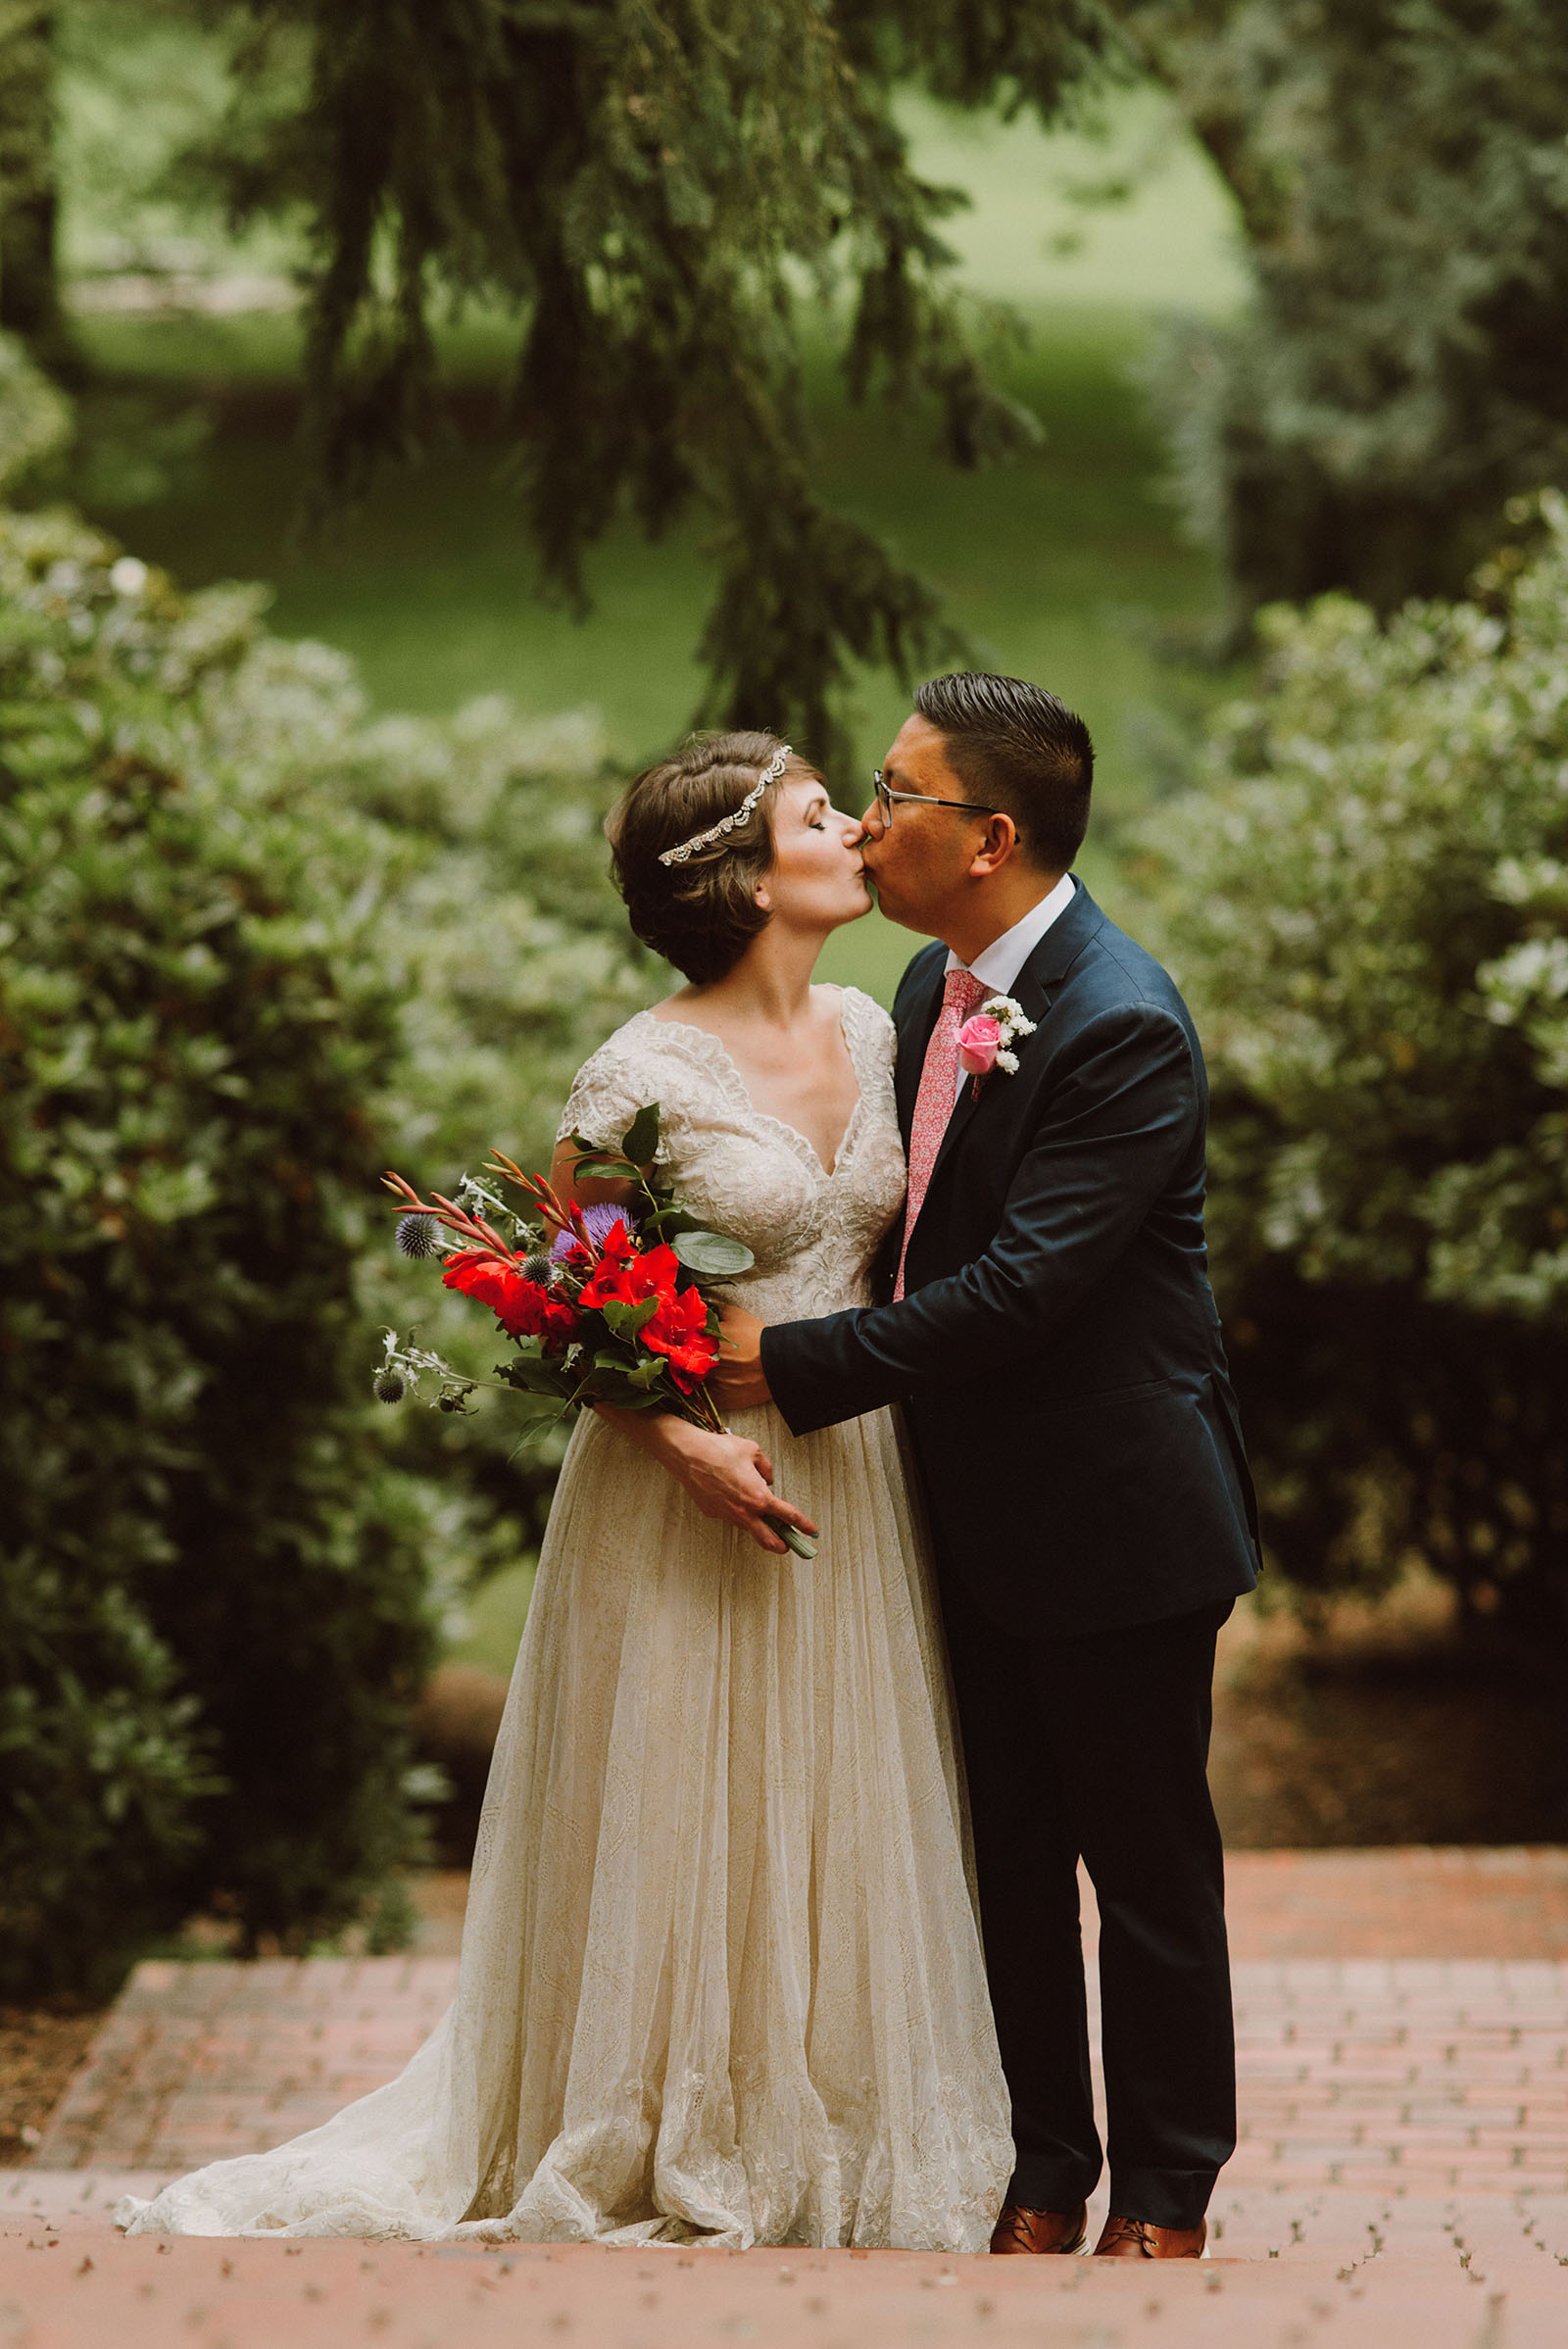 Bride and Groom kissing on the steps in Laurelhurst Park | Downtown Portland Elopement